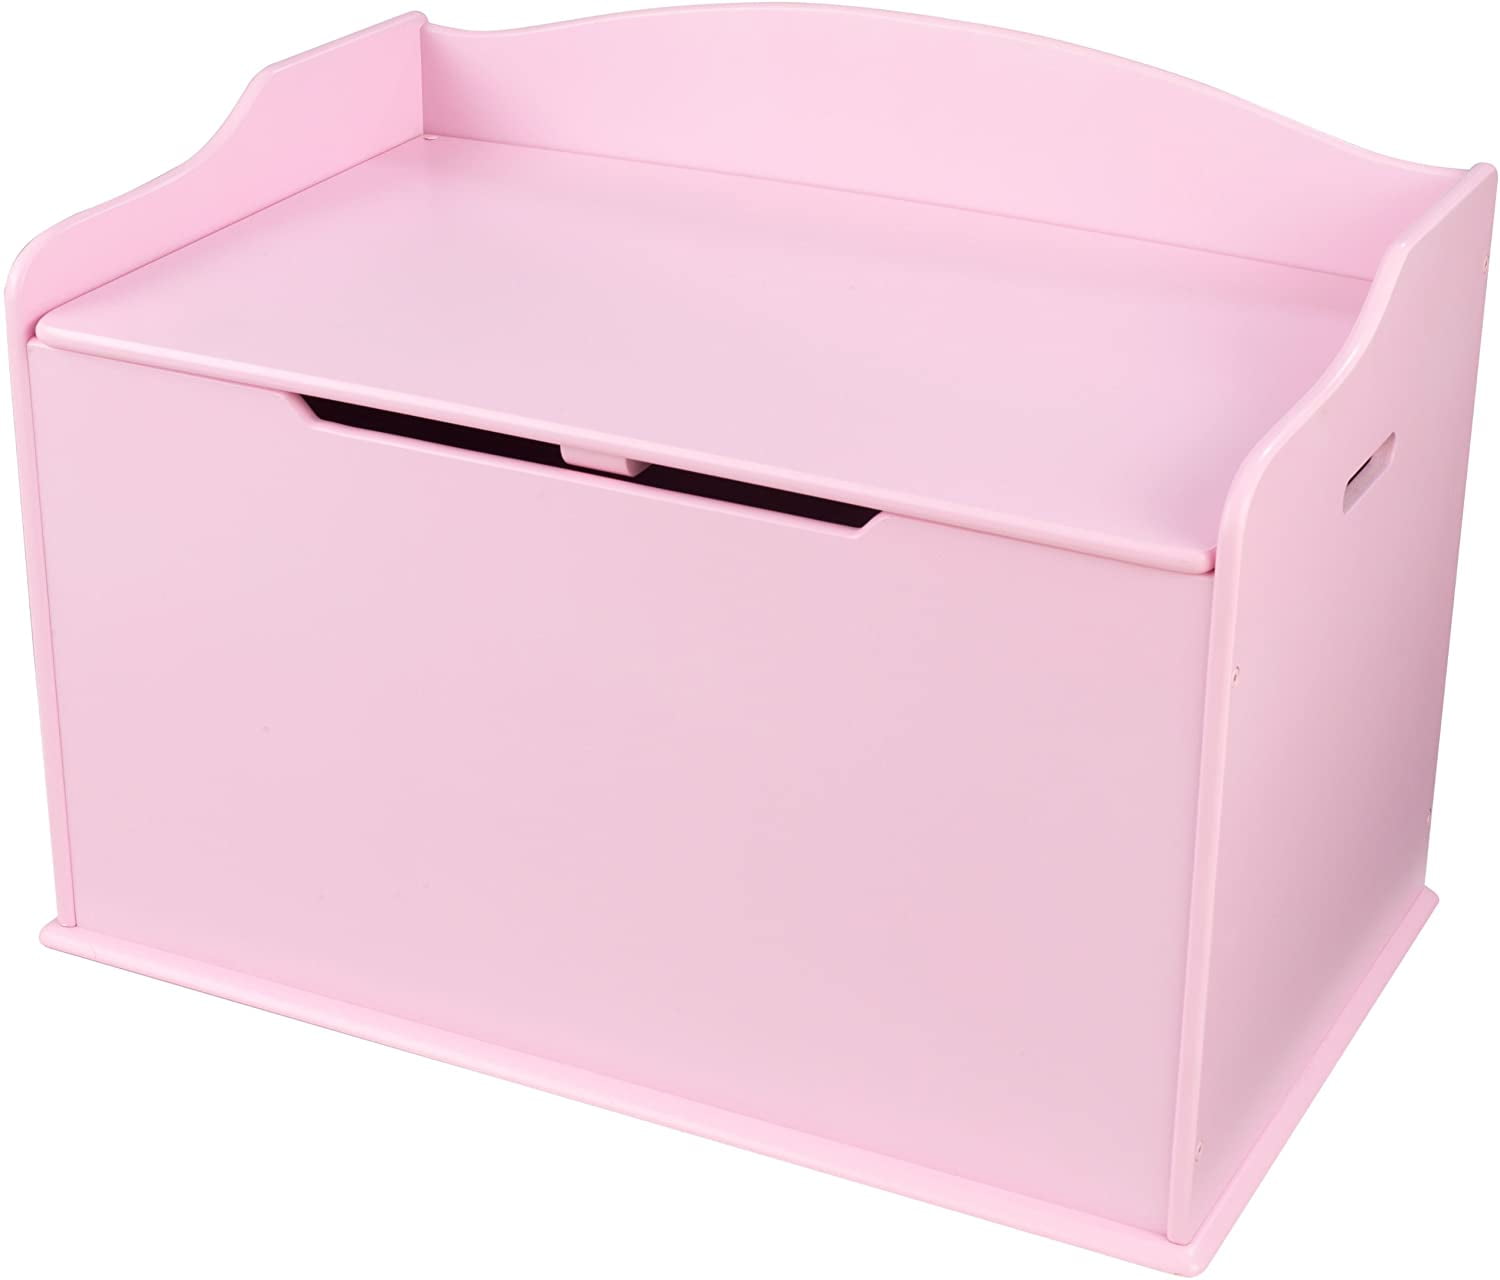 pink toy chest